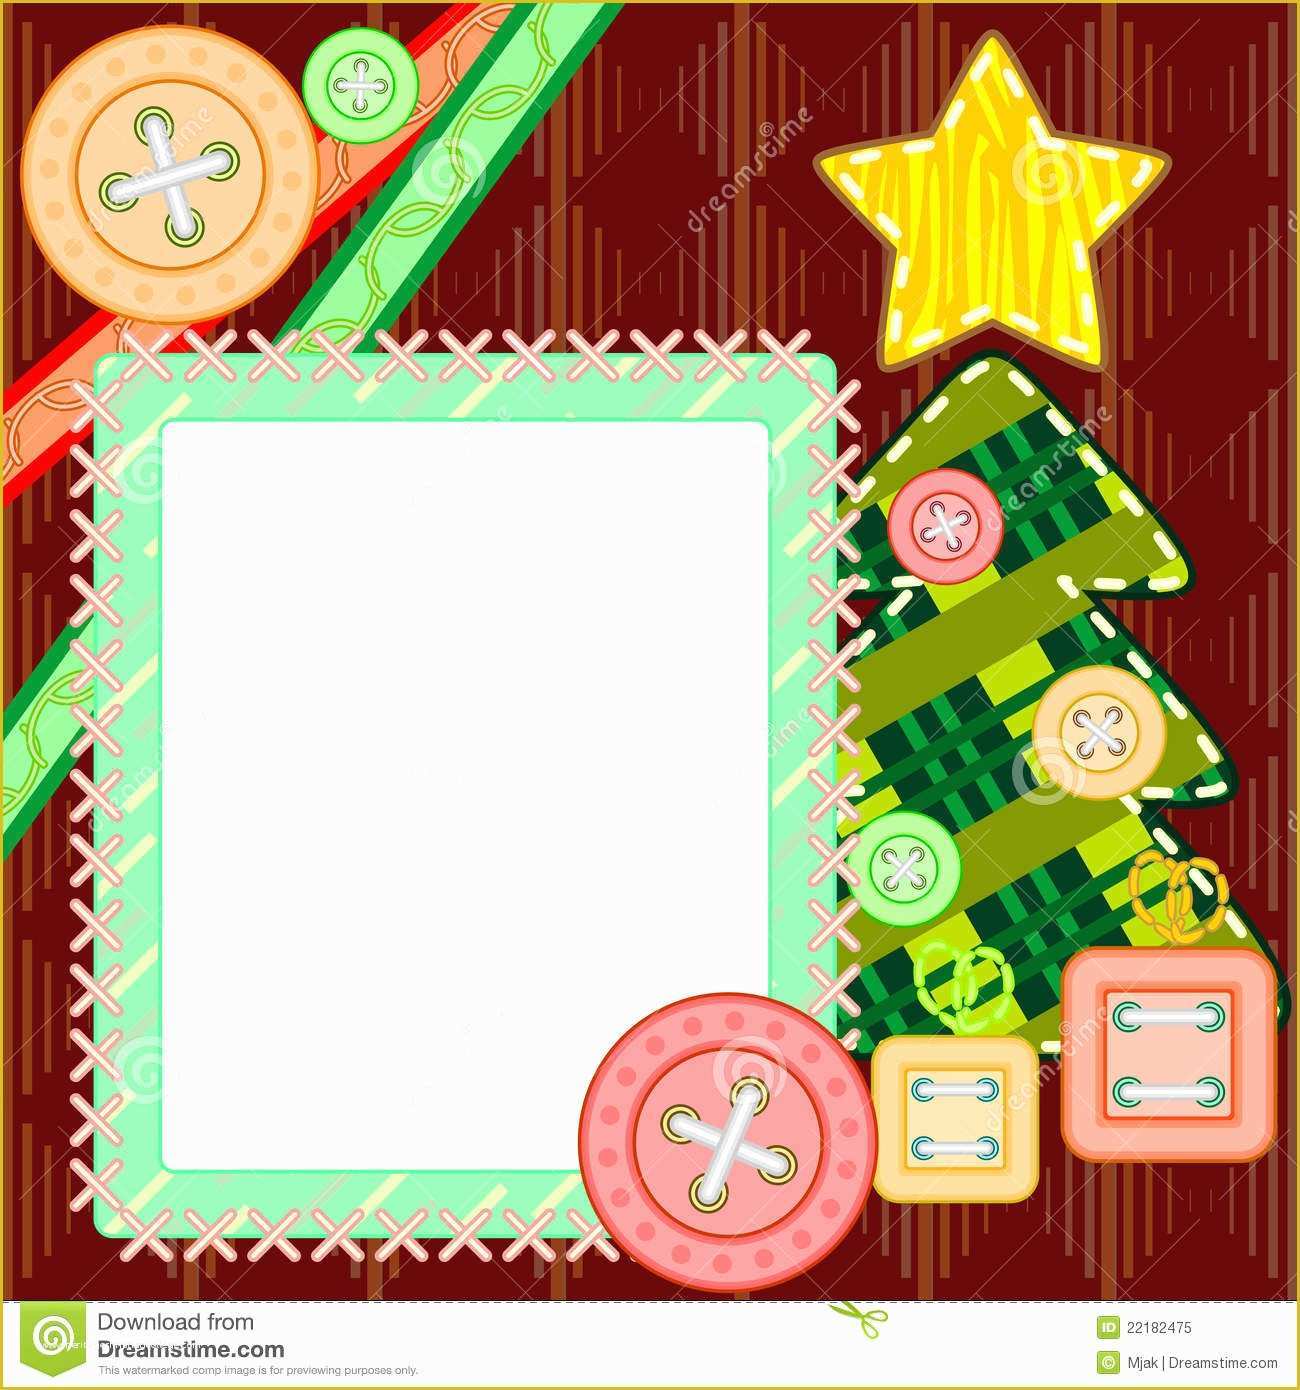 Photo Card Template Free Of Scrapbook Christmas Card Royalty Free Stock Image